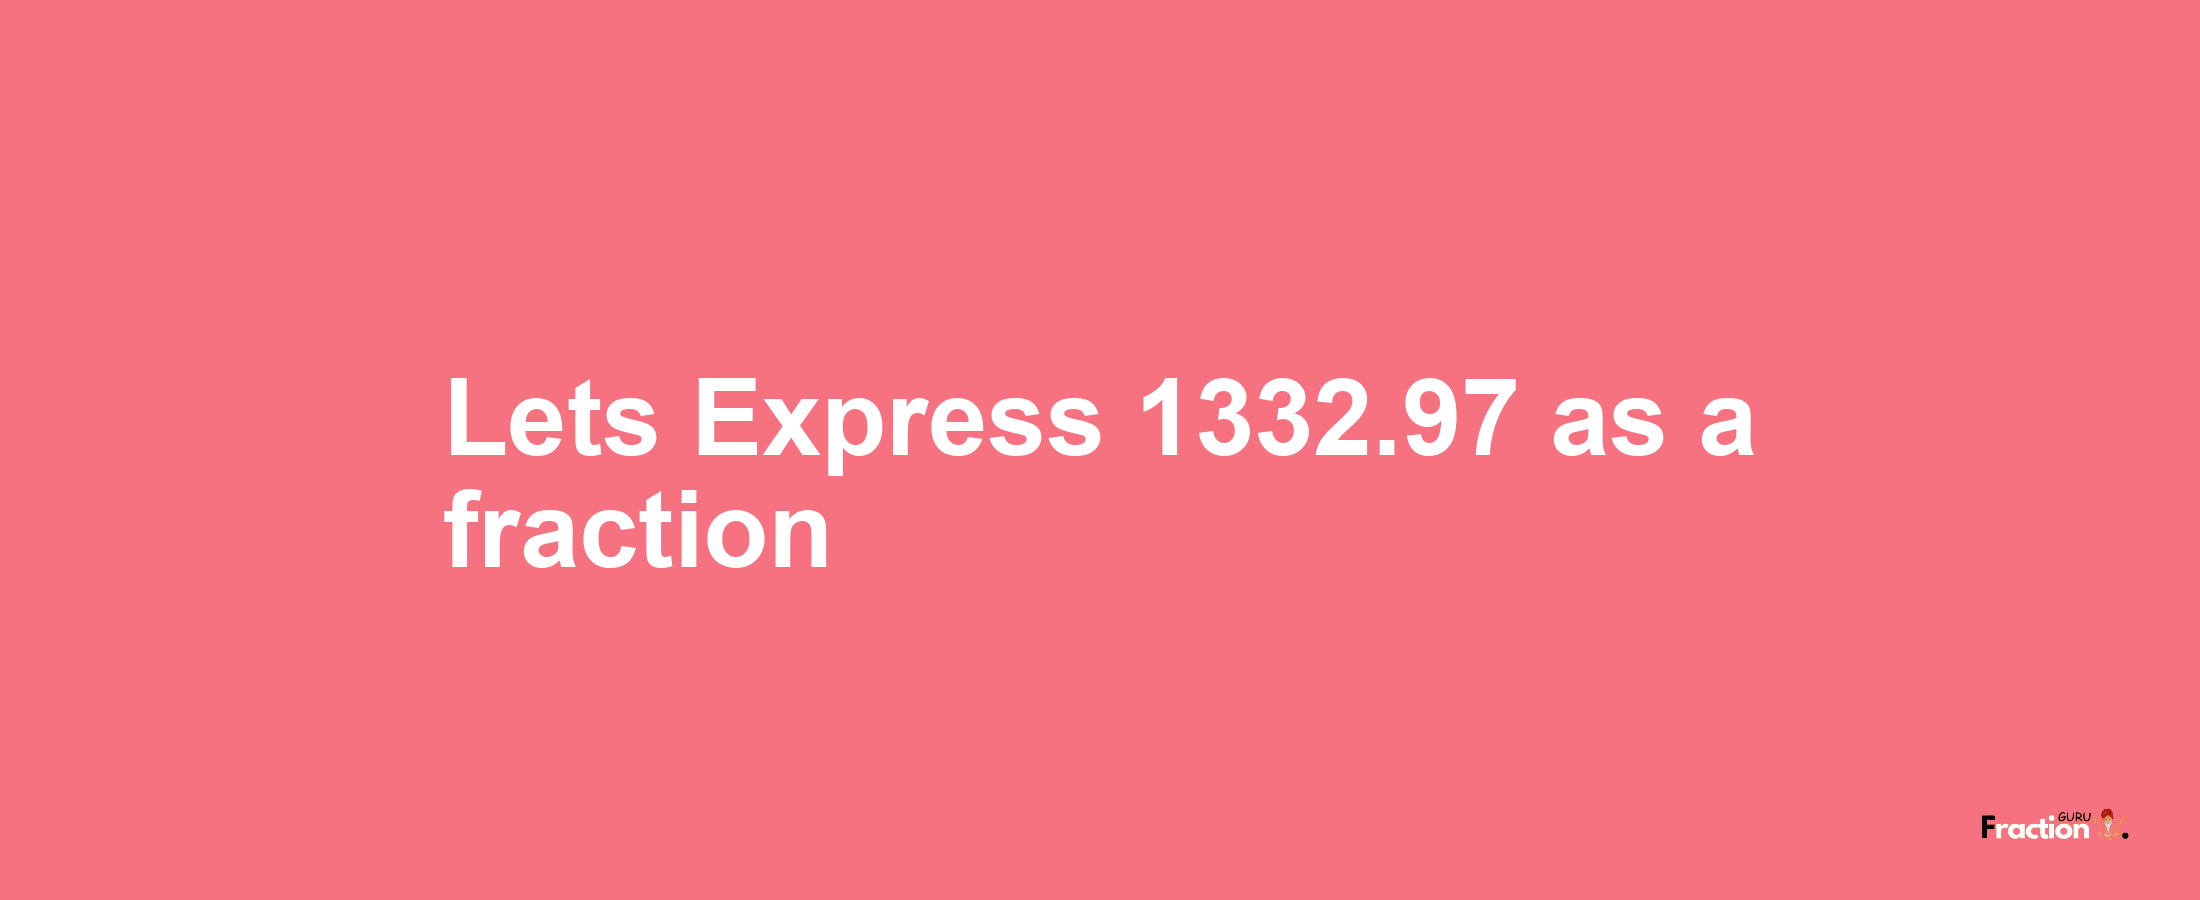 Lets Express 1332.97 as afraction